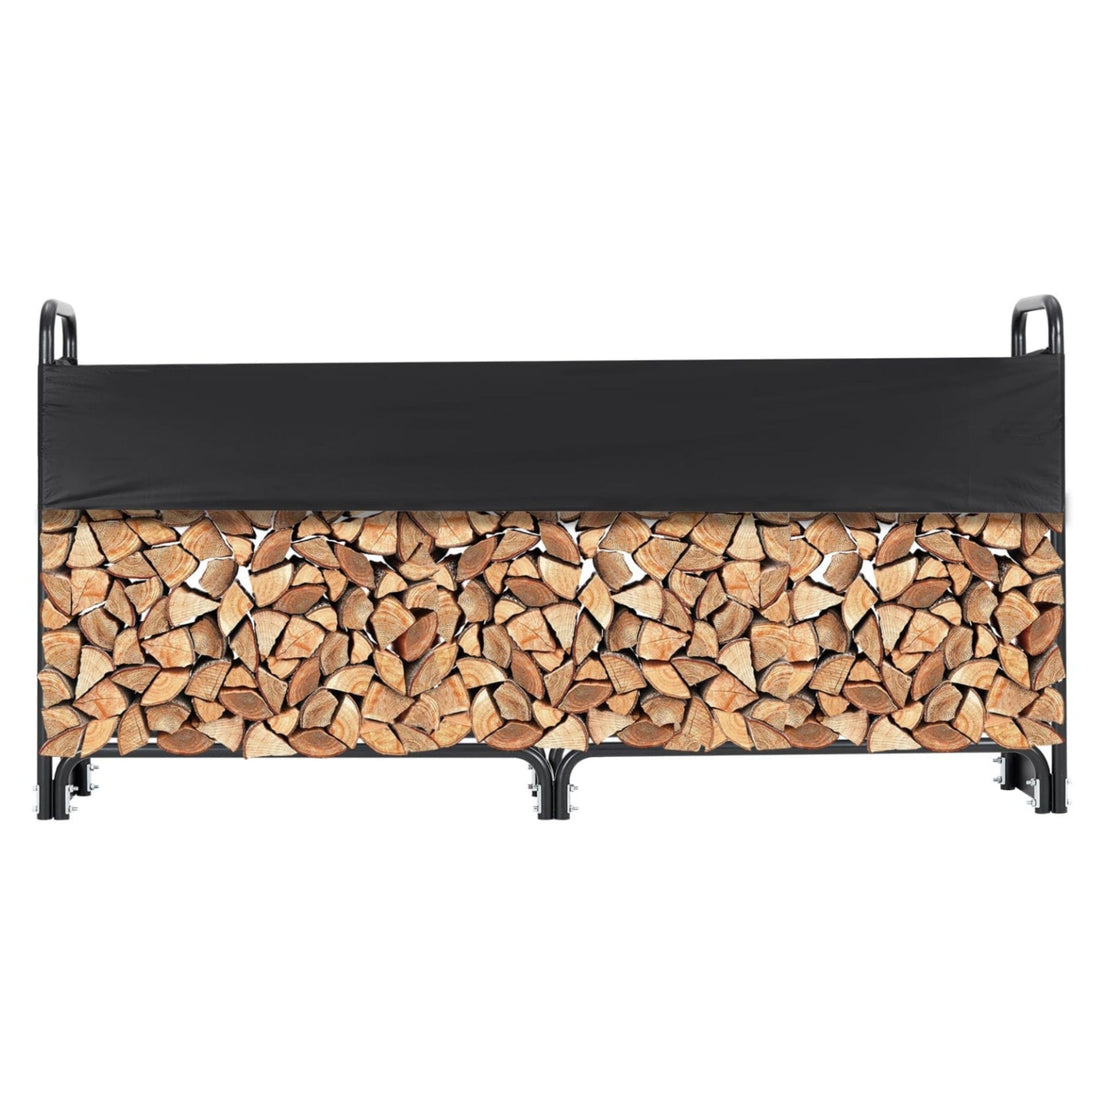 GARVEE 8FT Firewood Rack Outdoor Firewood Rack Outdoor with Cover for Fireplace Wood Storage